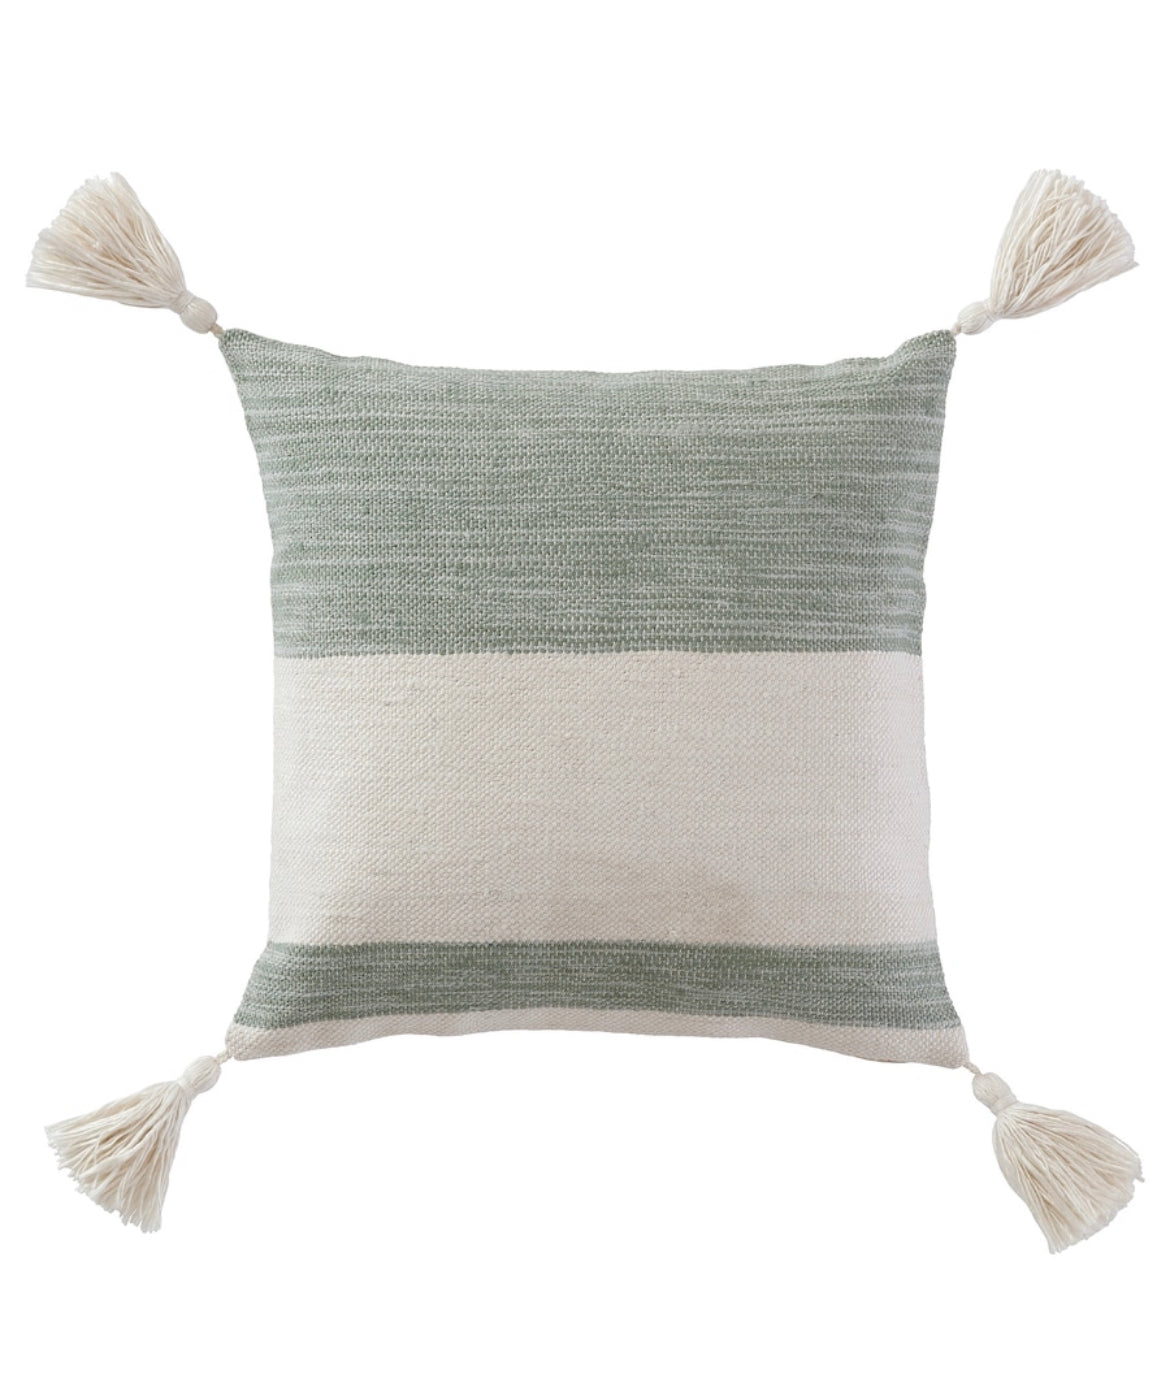 Woven Throw Cushion with Tassels